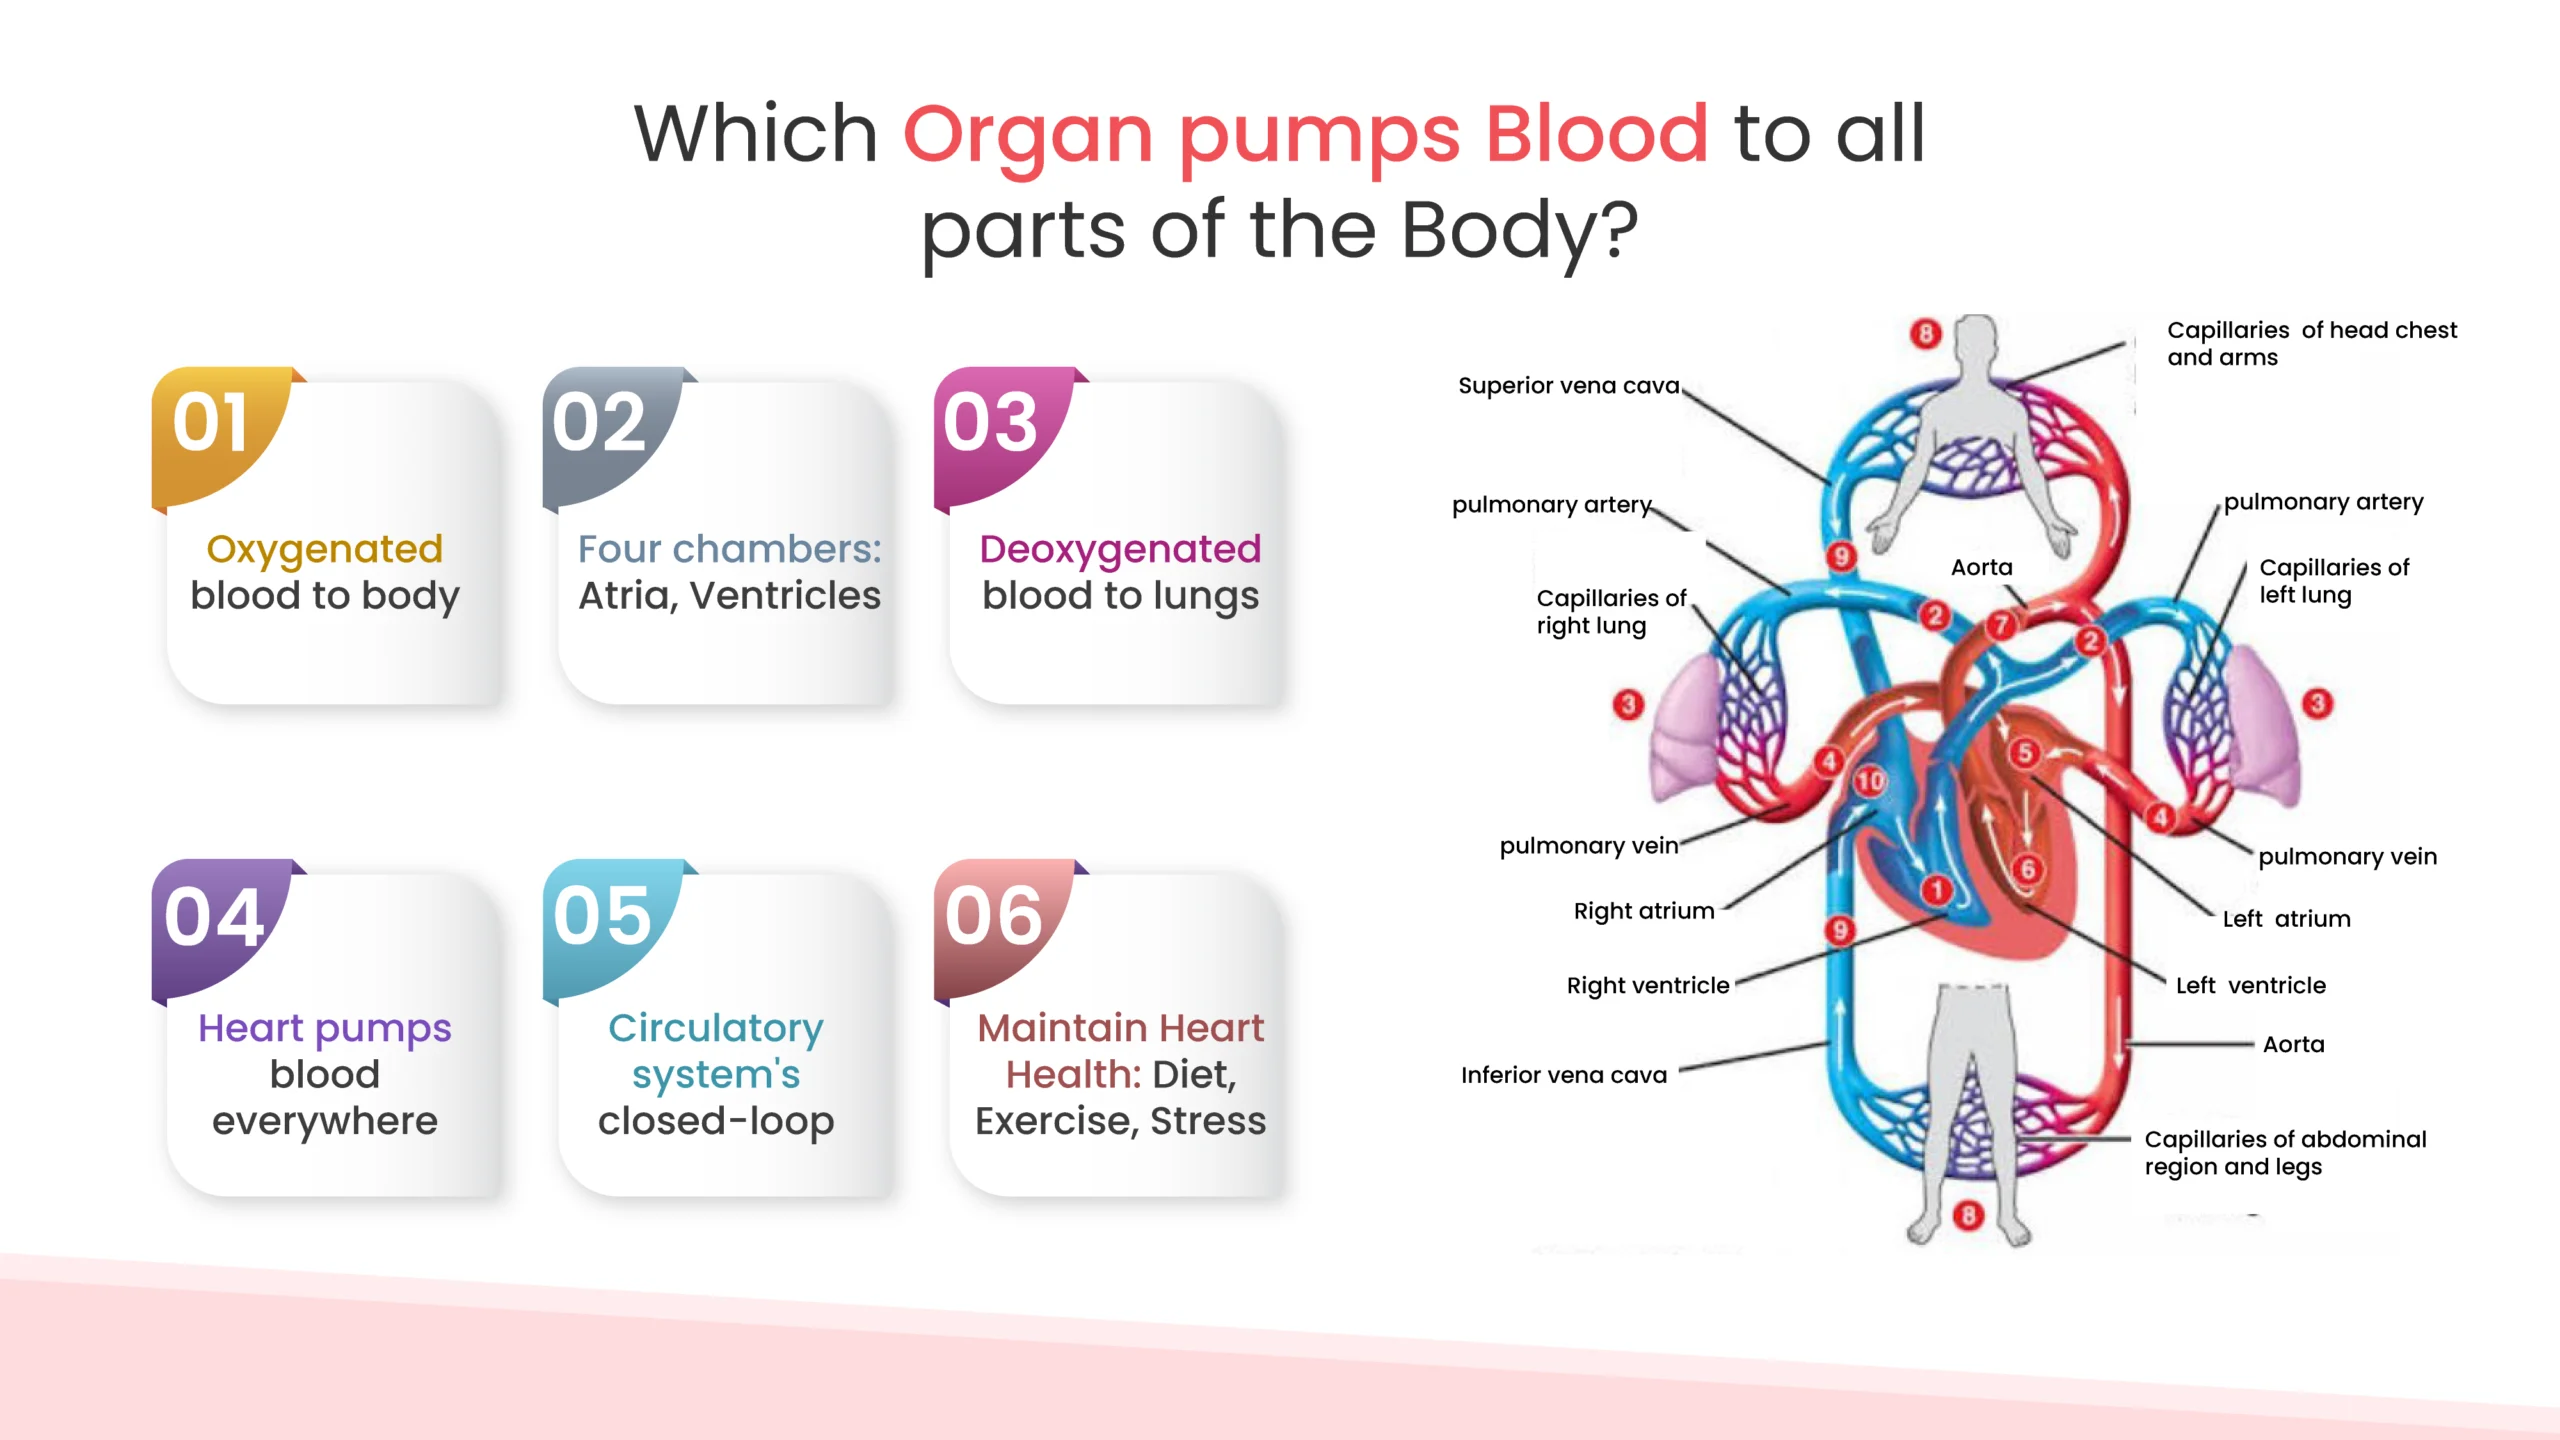 which organ pumps blood to all parts of the body